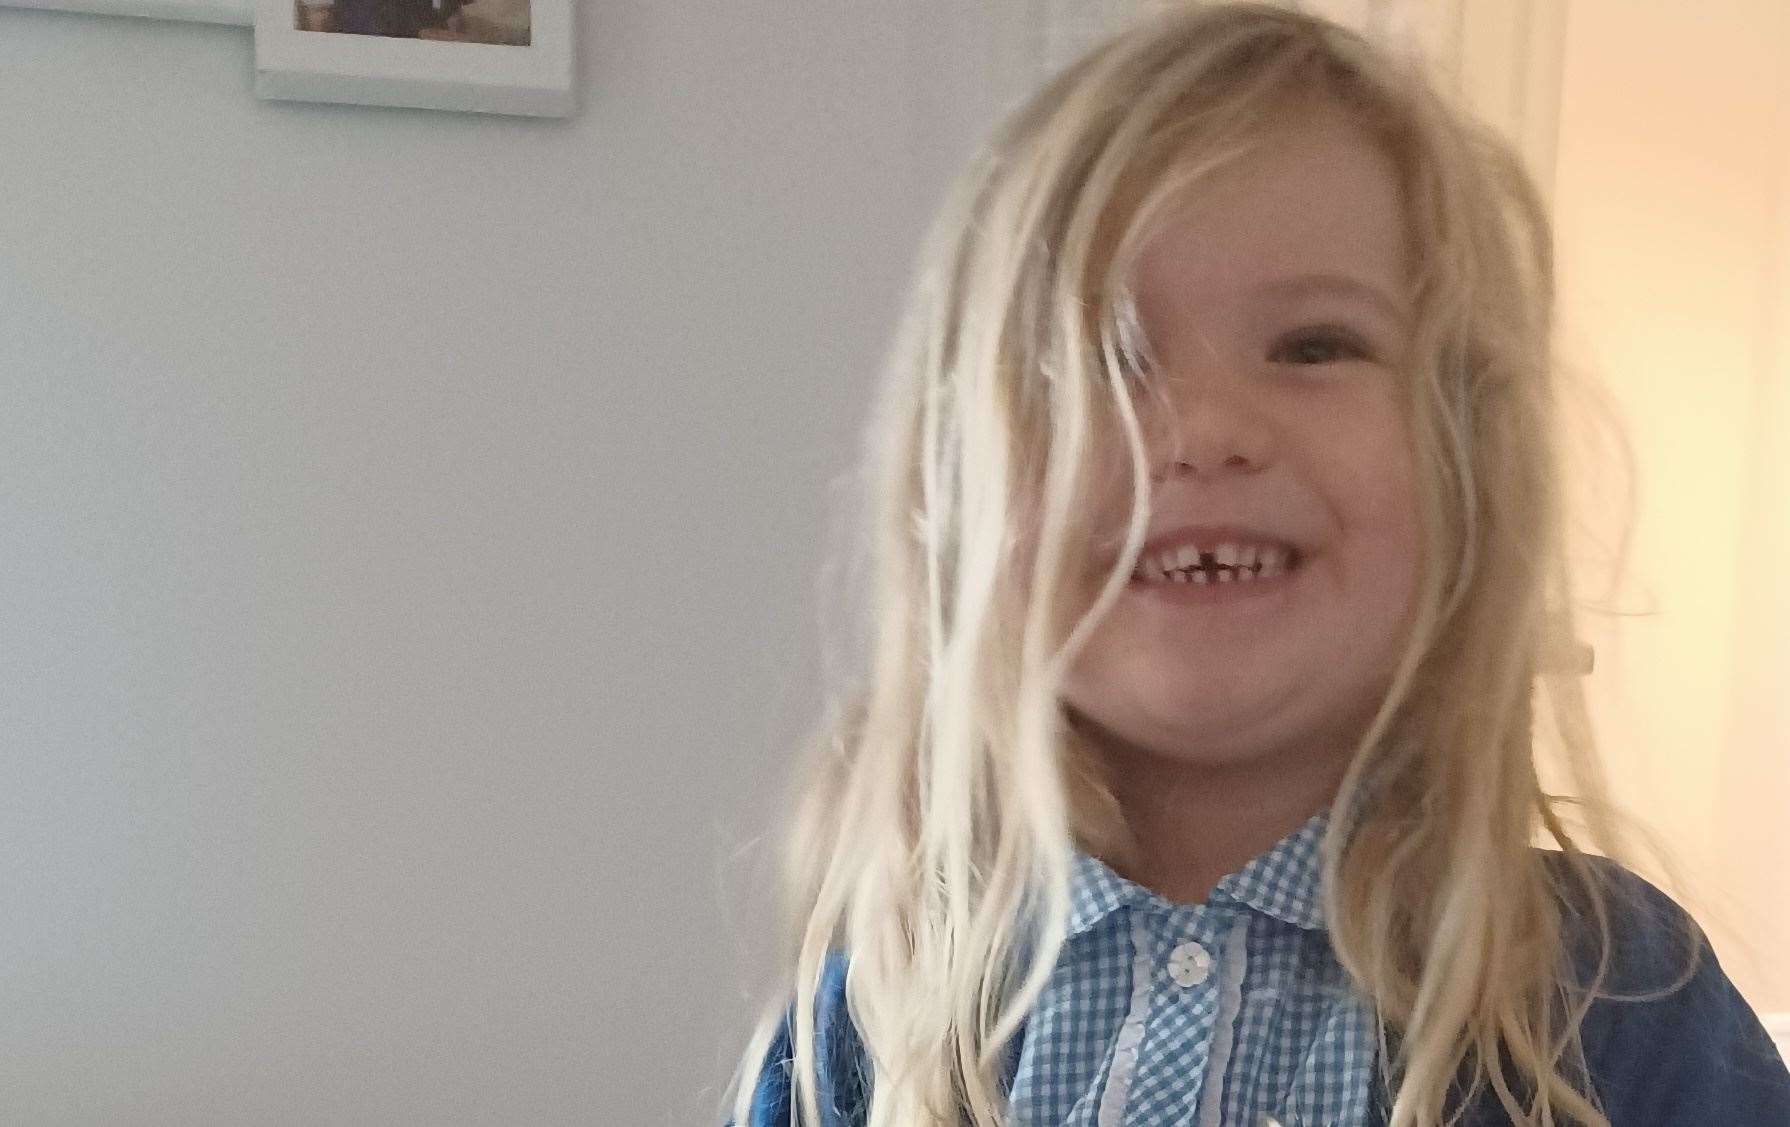 Millie is starting school in September - and already has some hand-me-down uniform